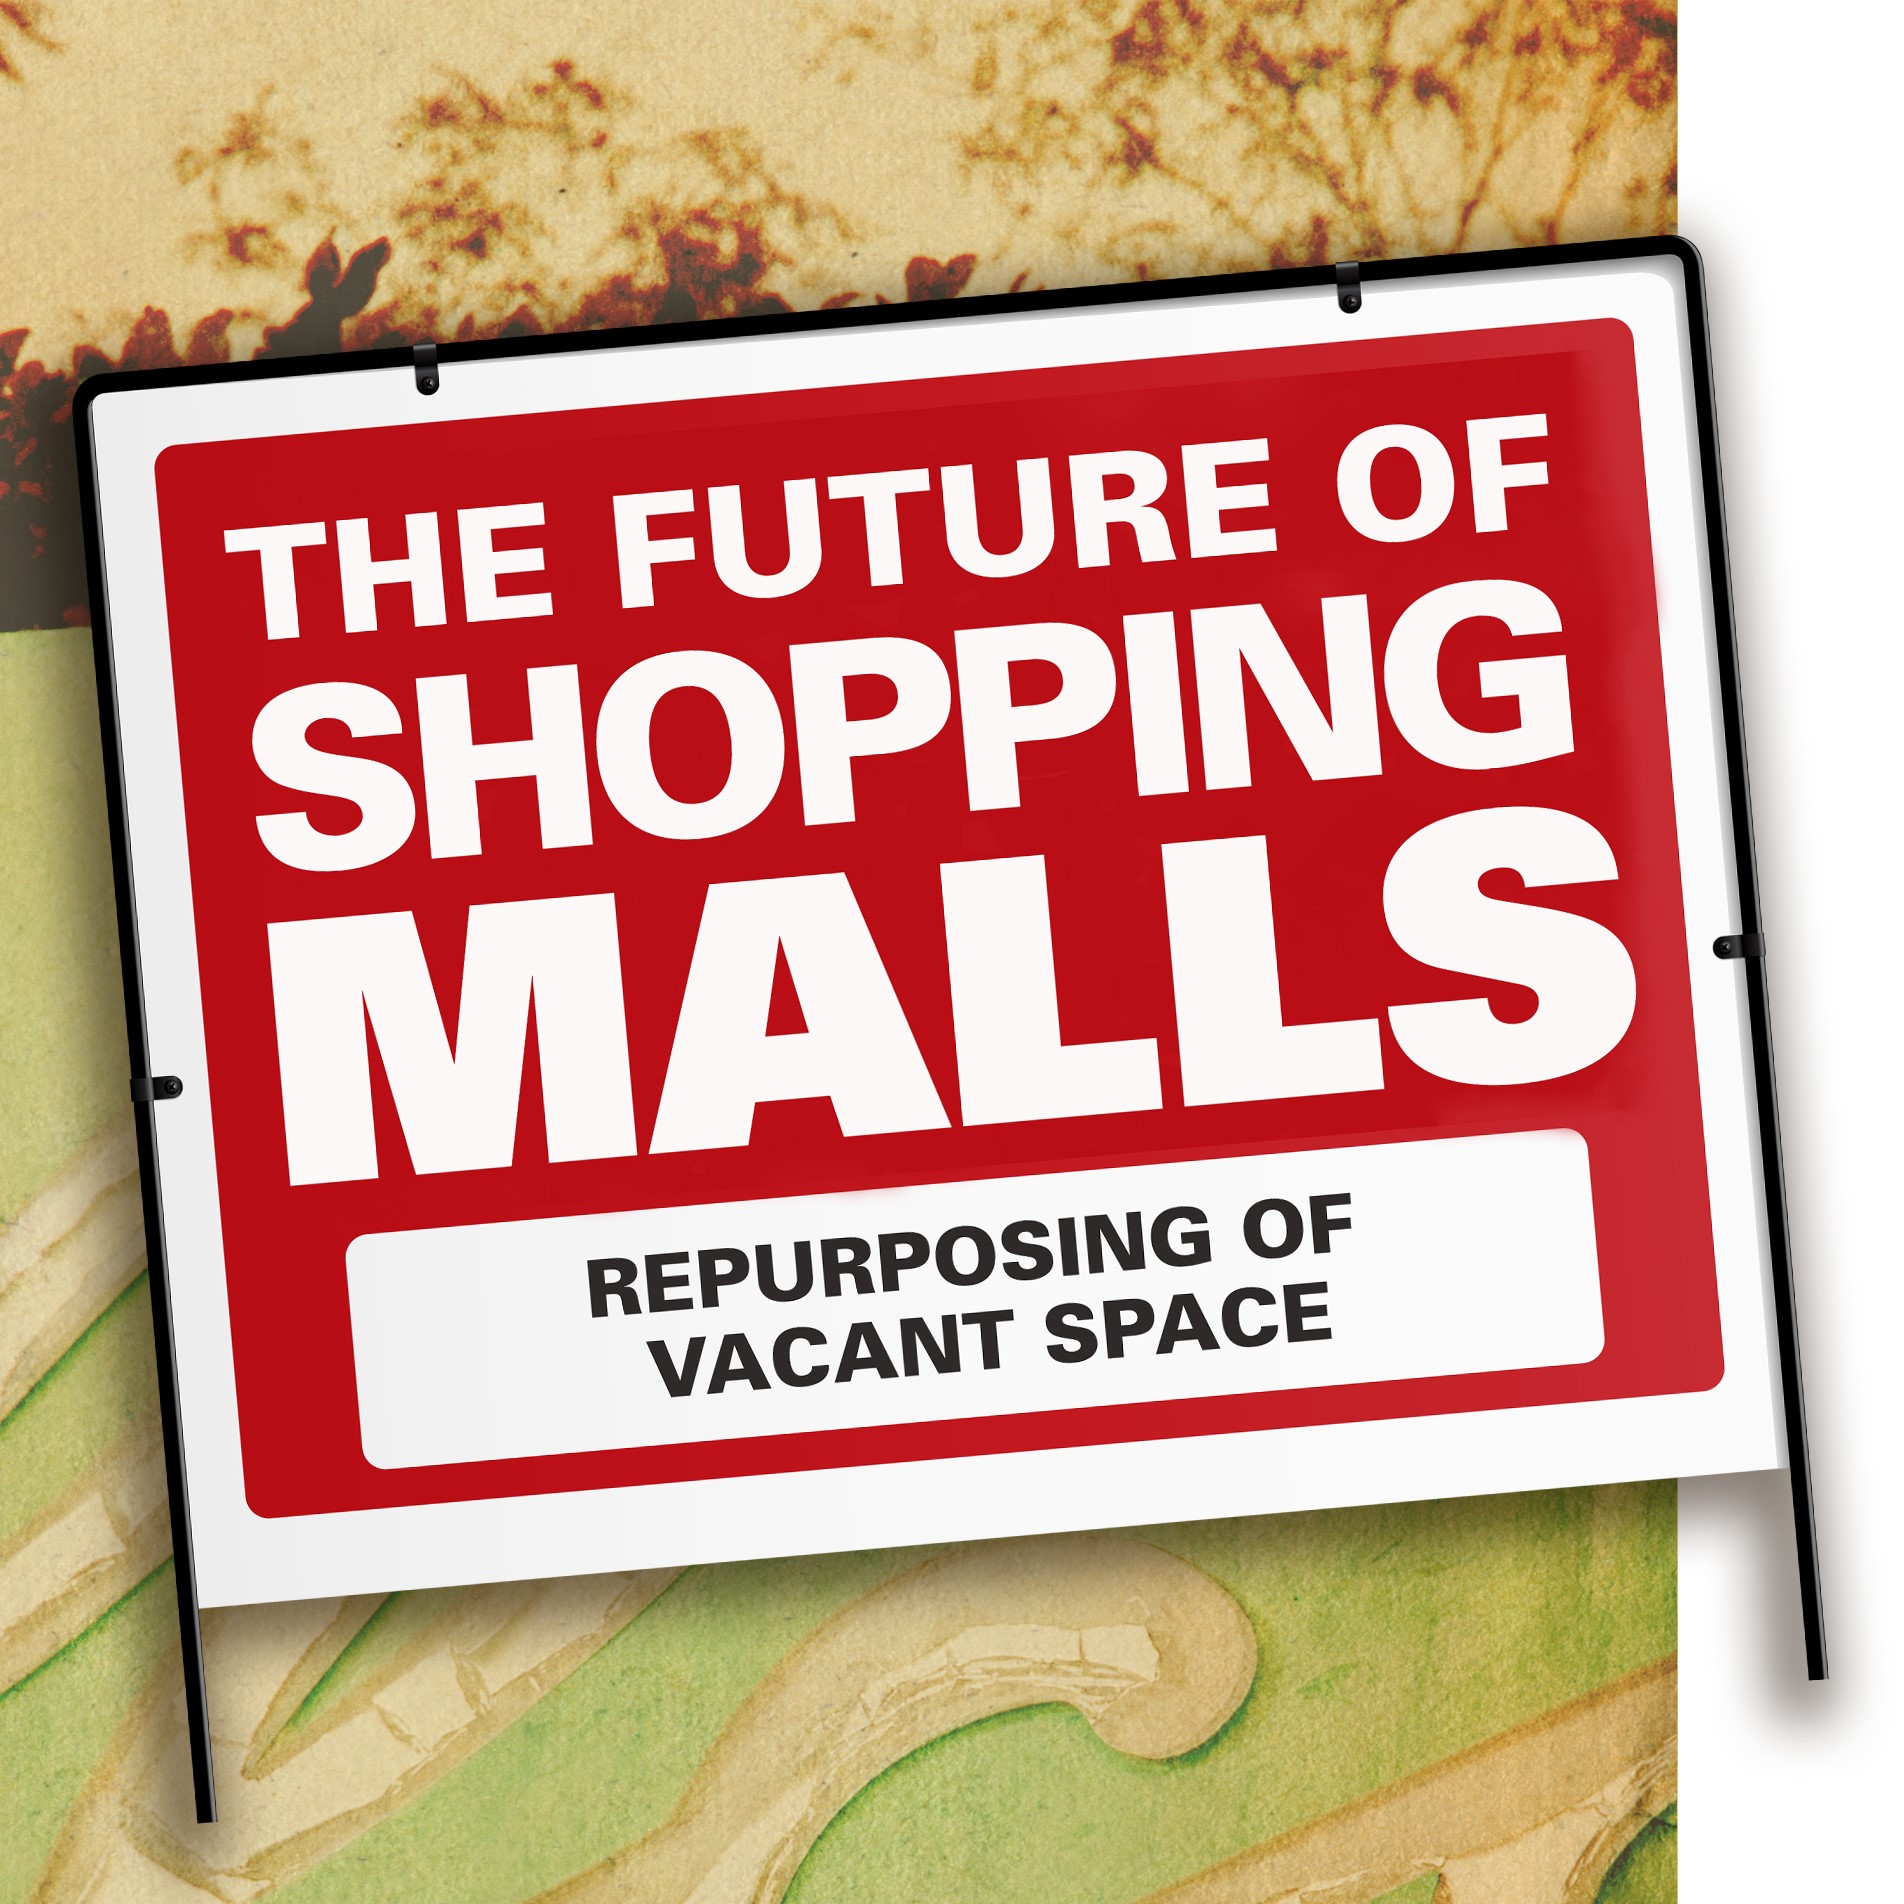 The Future of Shopping Malls